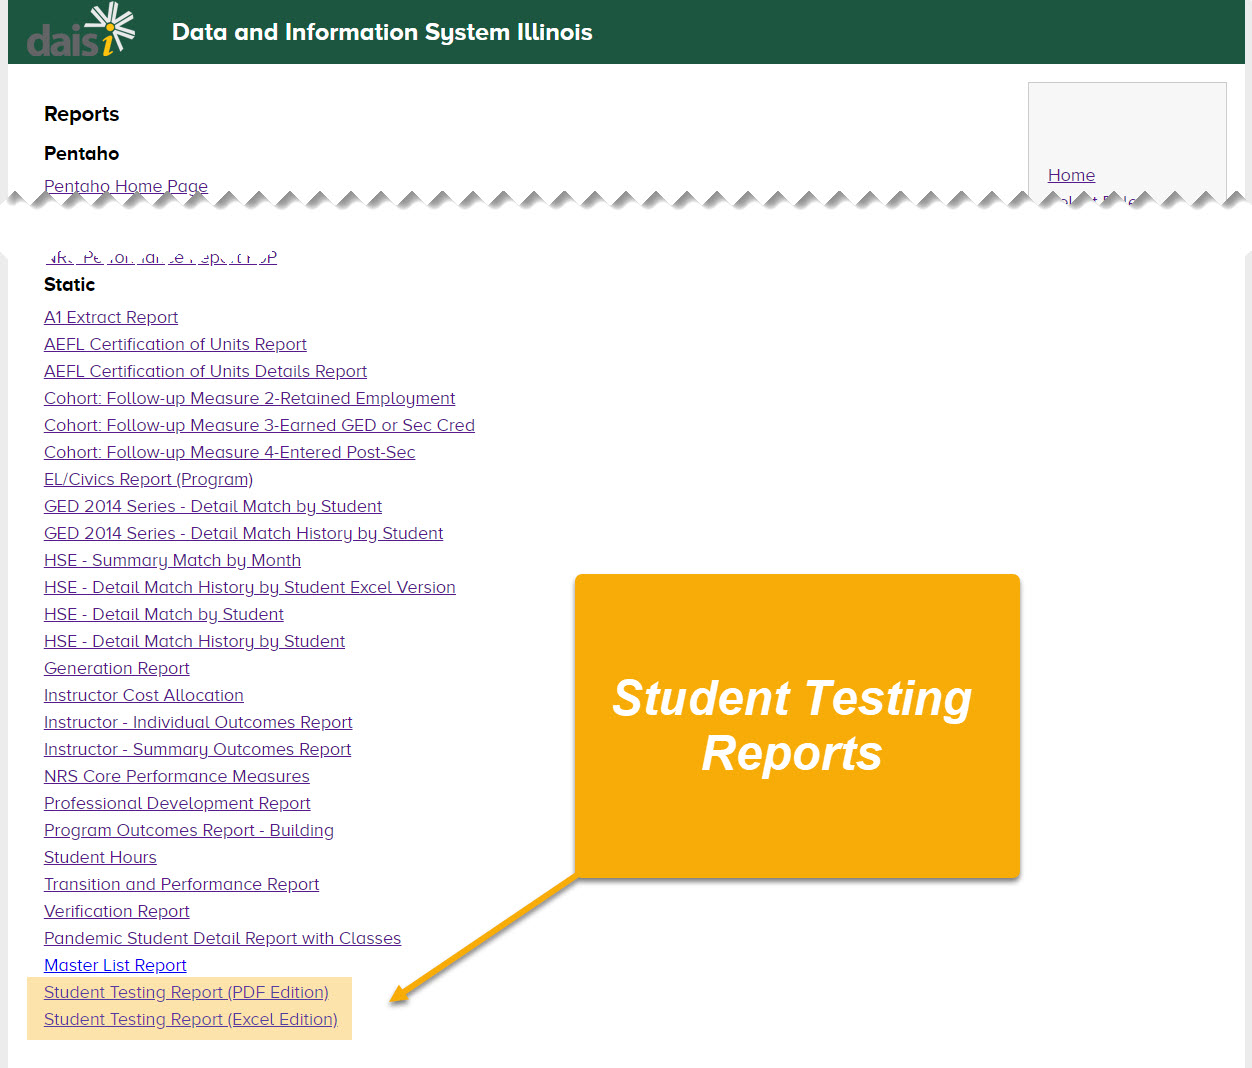 Reports page with student testing reports highlighted